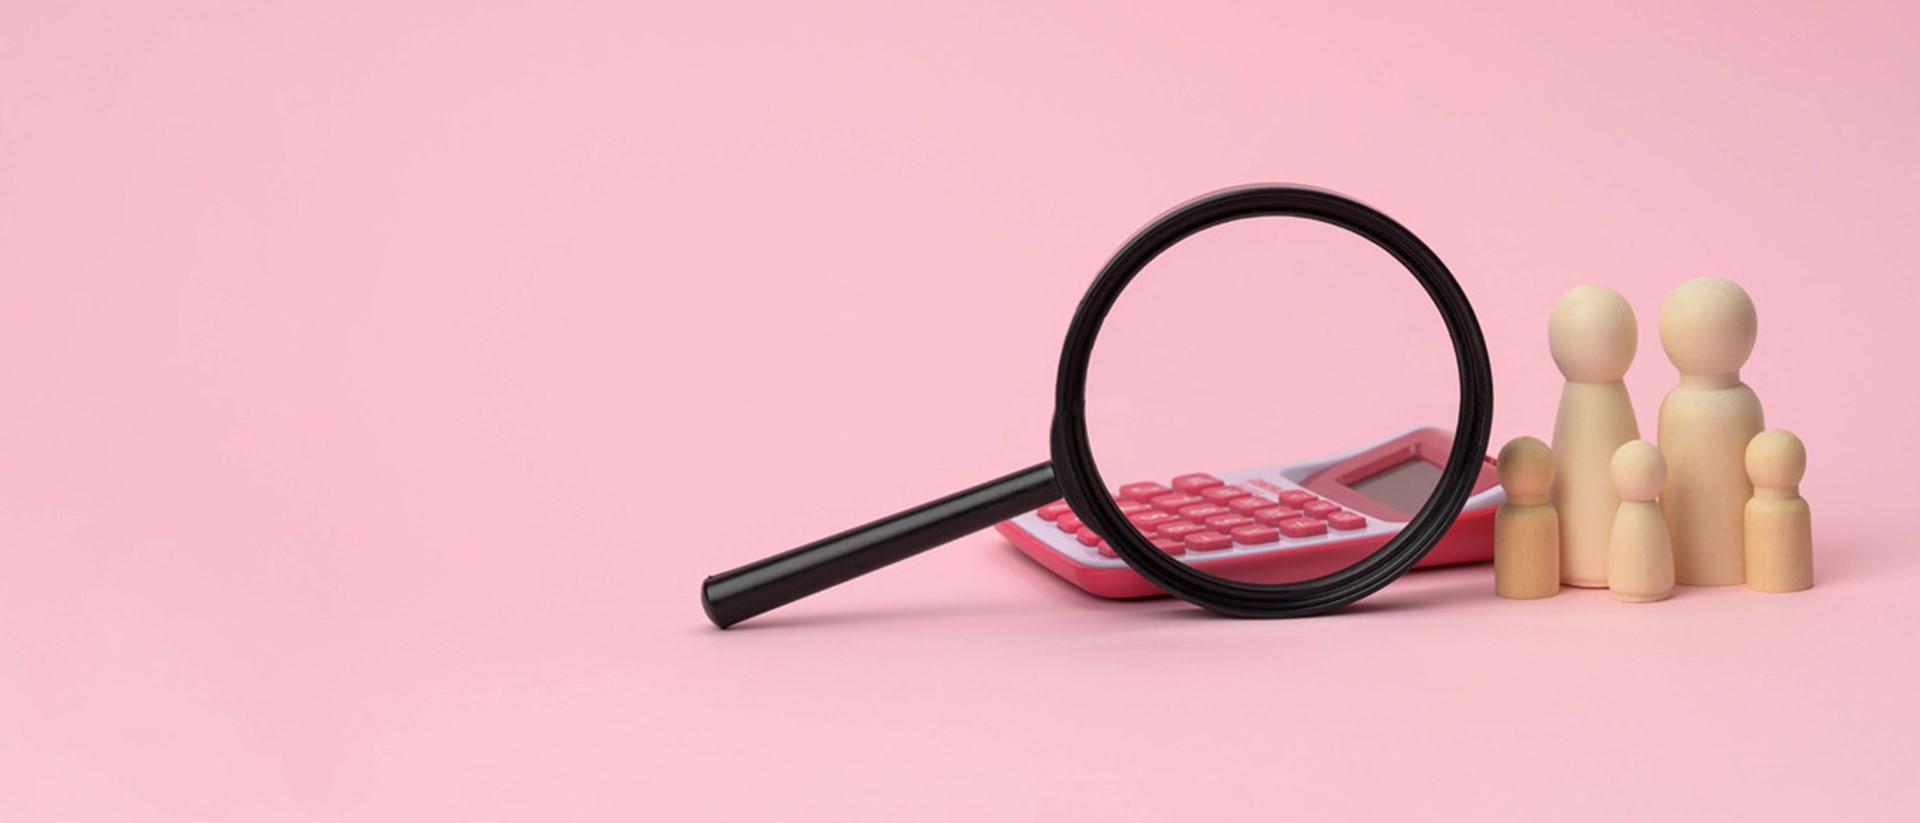 A magnifying glass, a pink calculator and a group of wooden figures against a pink background